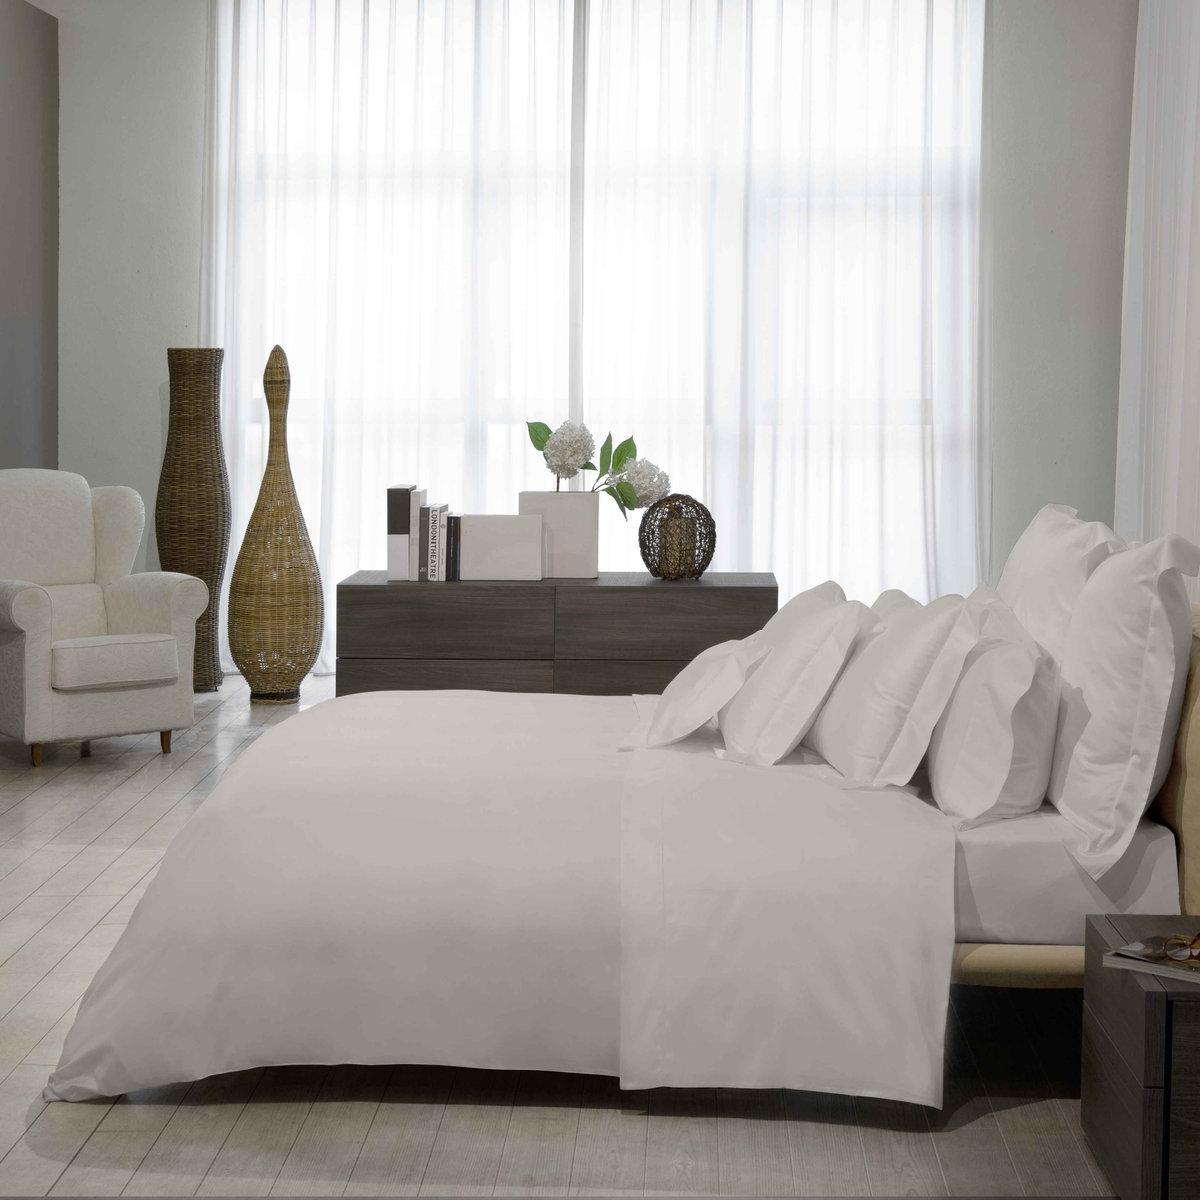 Full Bed Dressed in Pearl Signoria Nuvola Percale Bedding